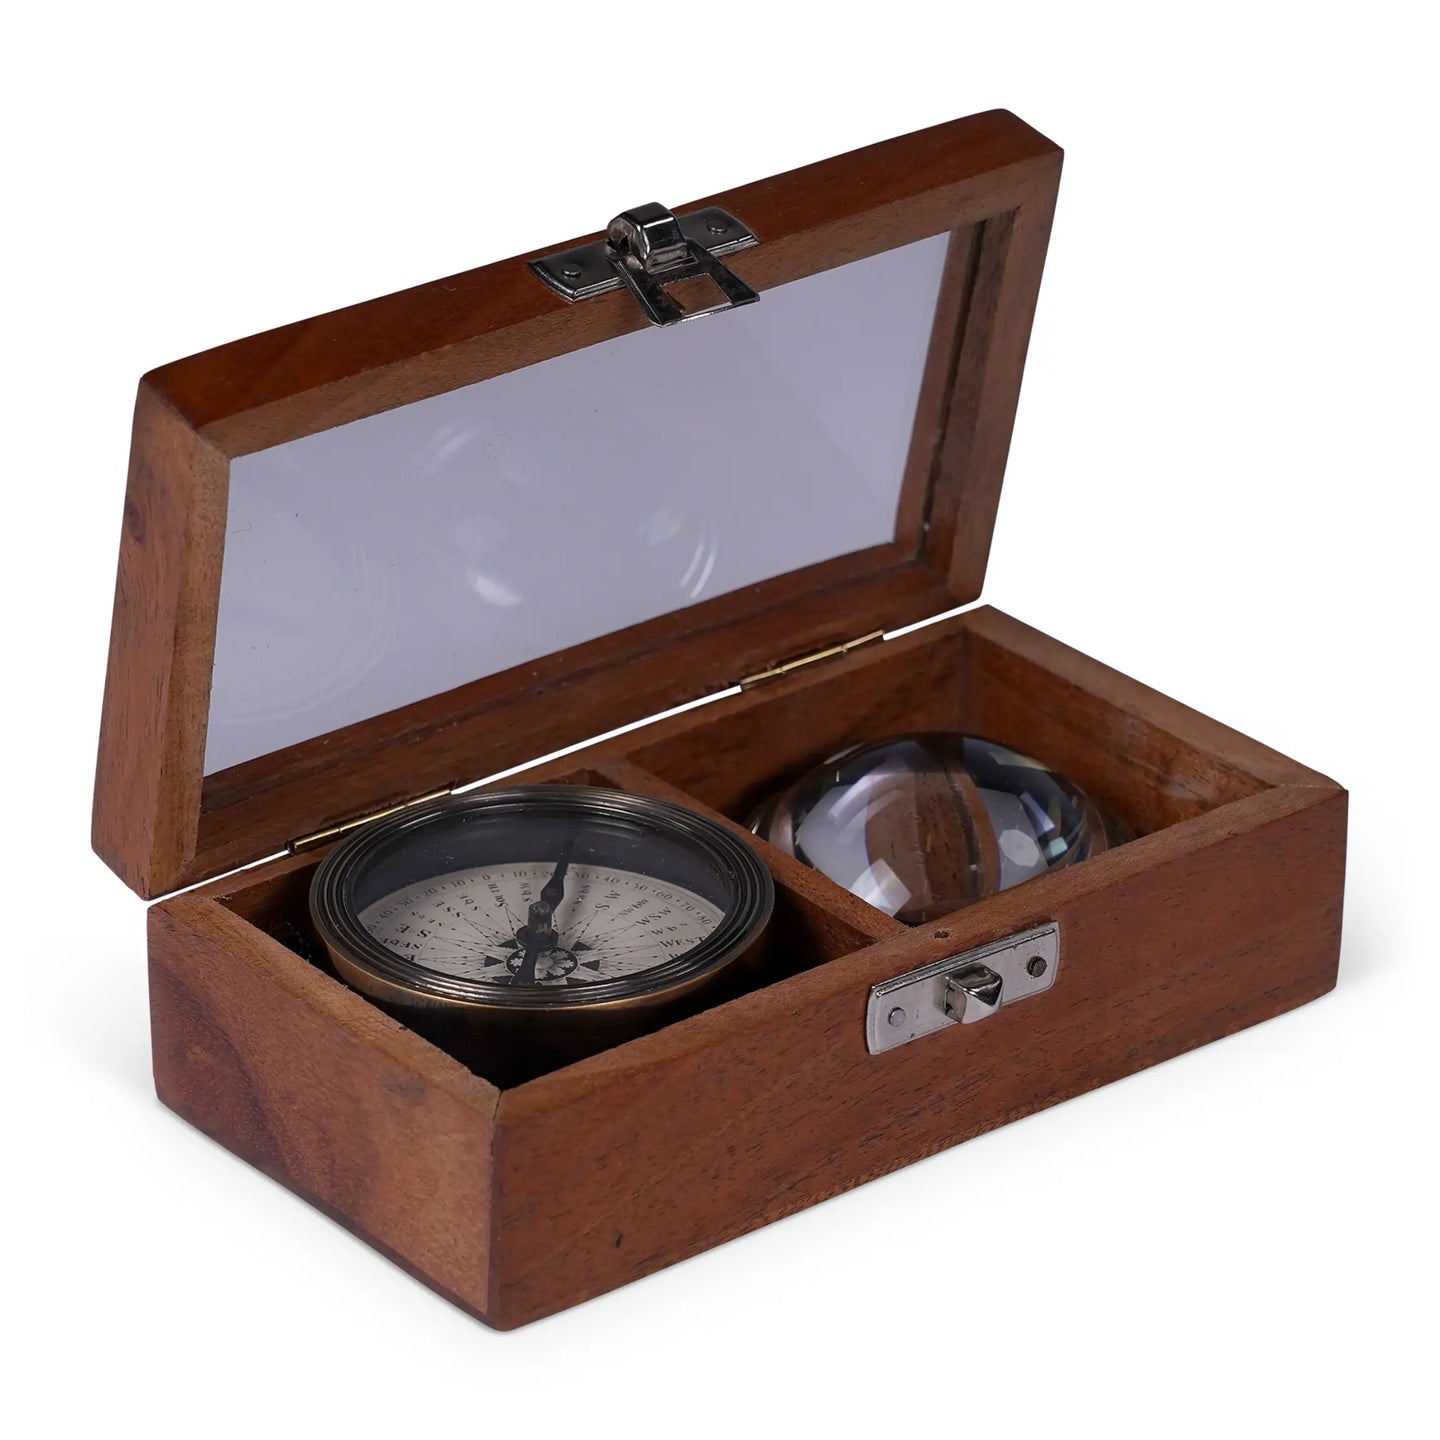 Authentic Models The Darwin Gift Box - GB001